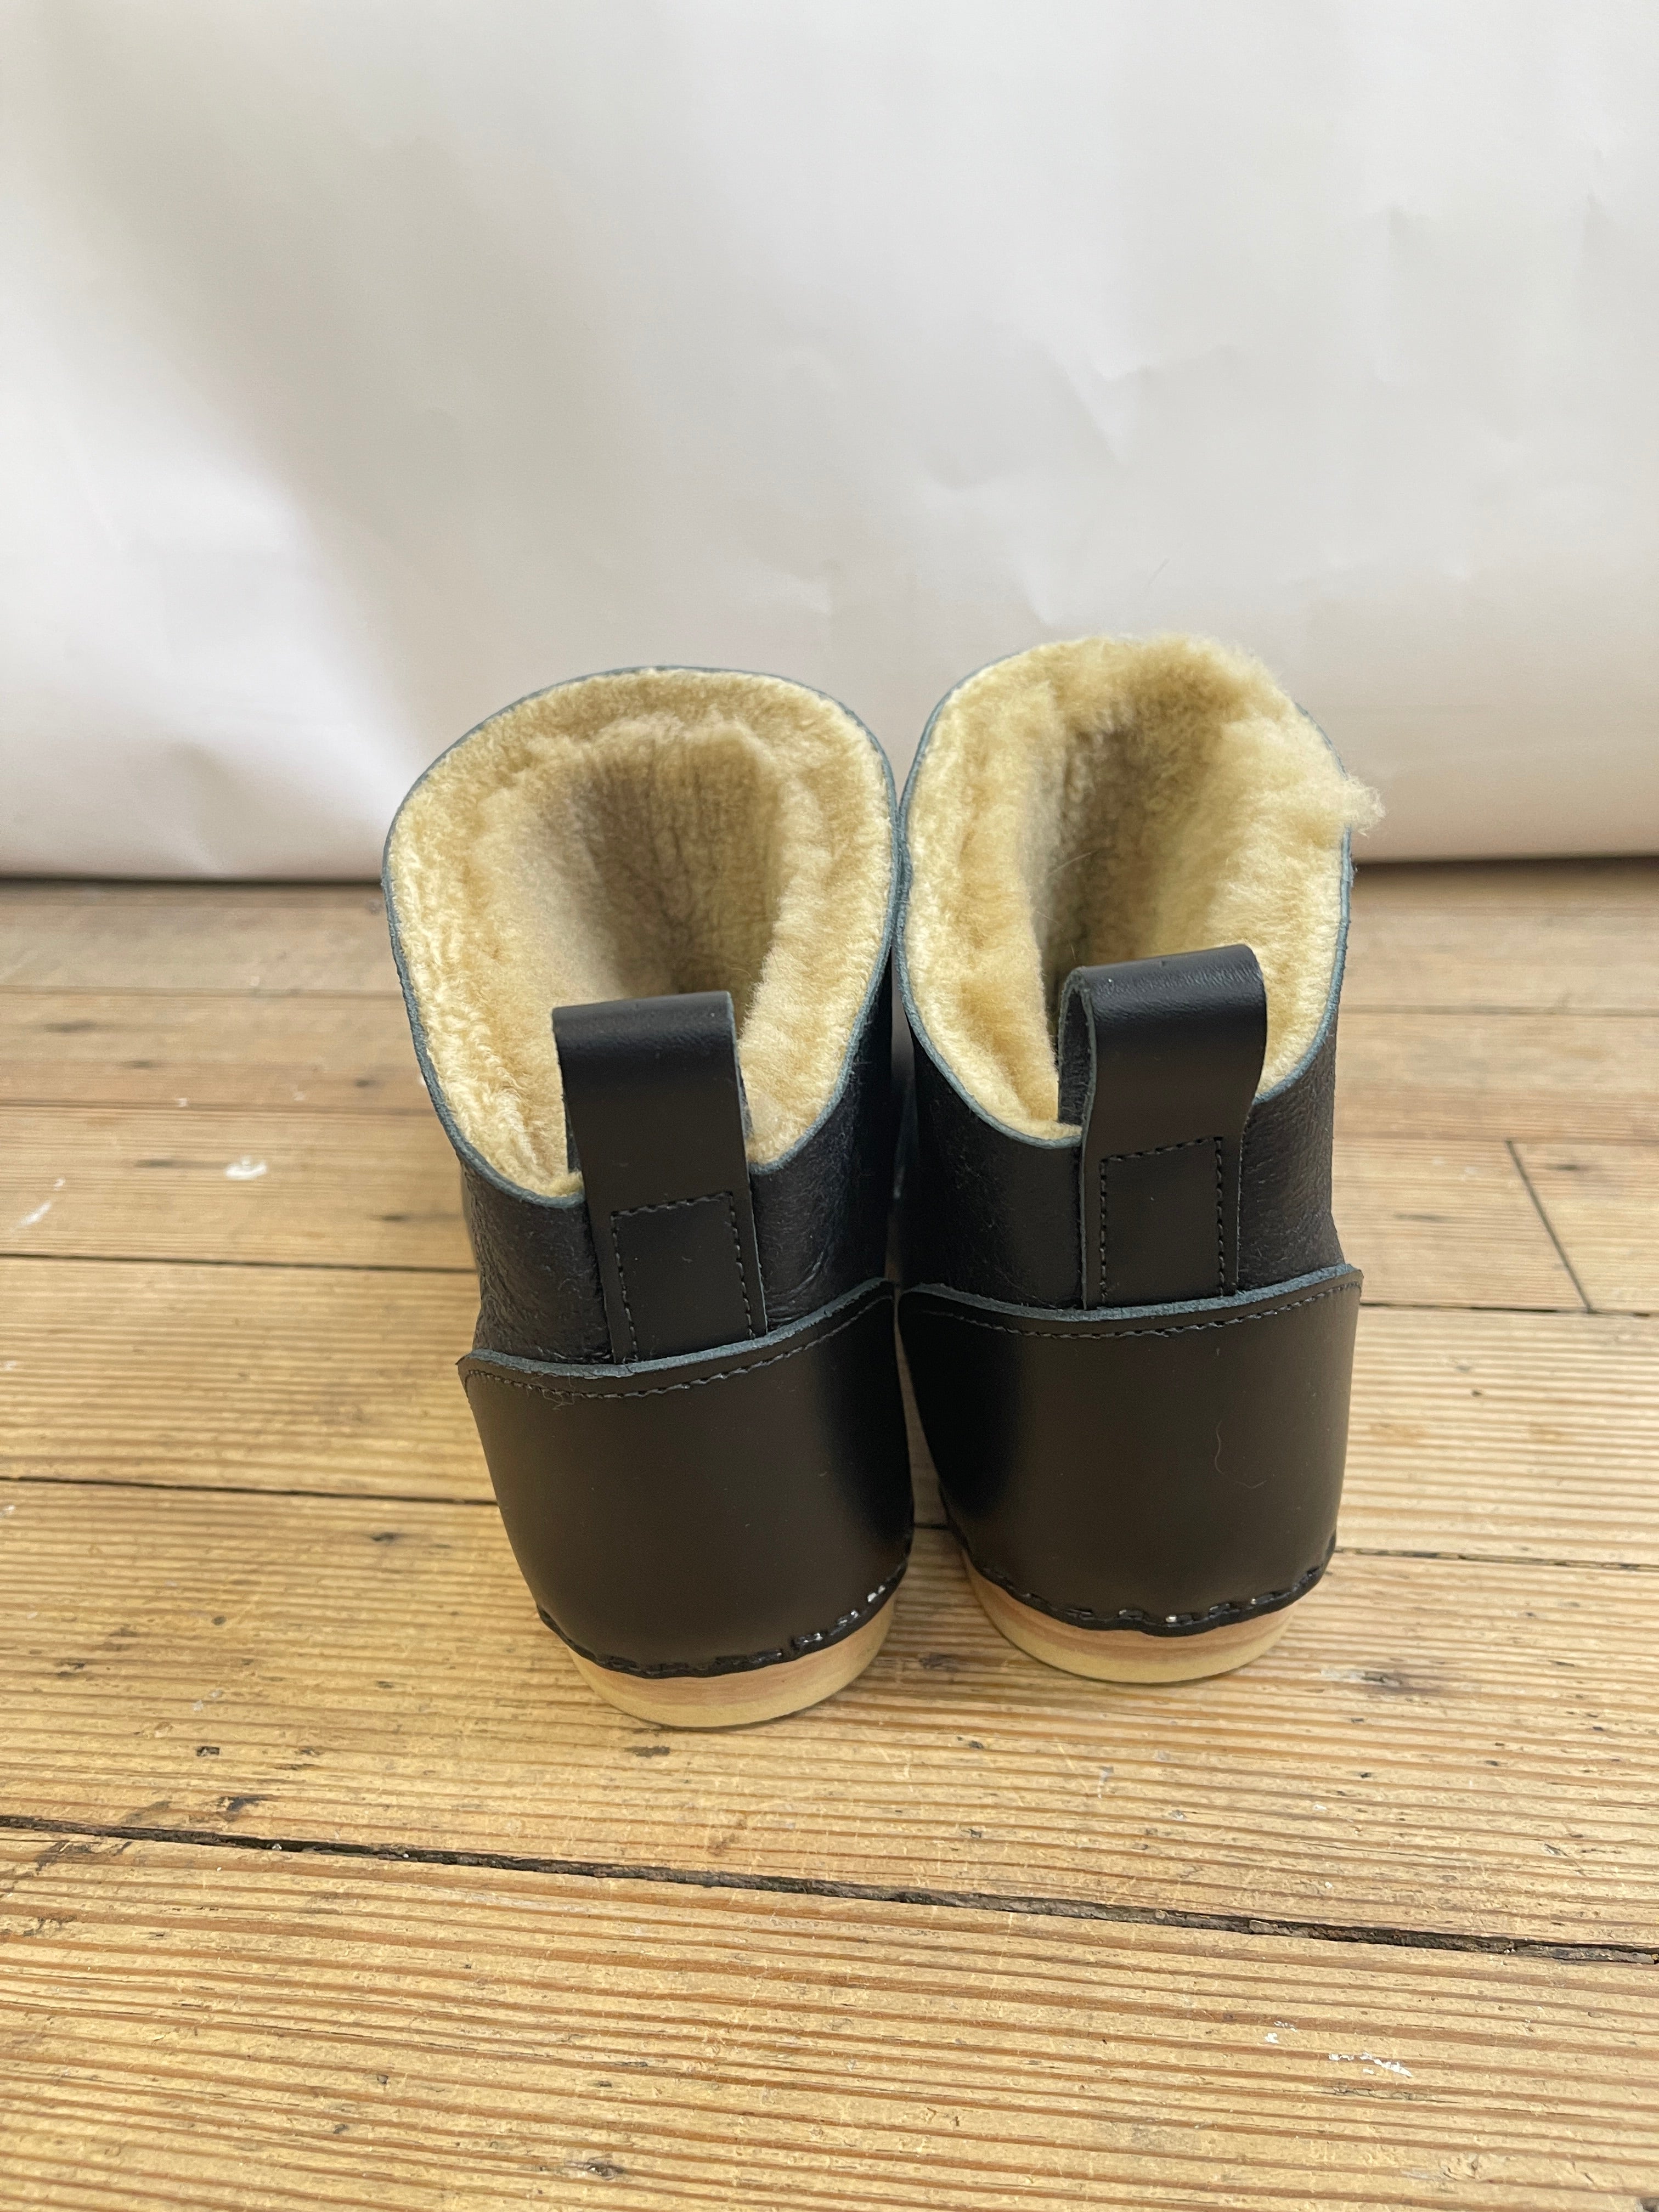 No.6 Low Shearling Clog Boot on Flat Bendable Base (39)